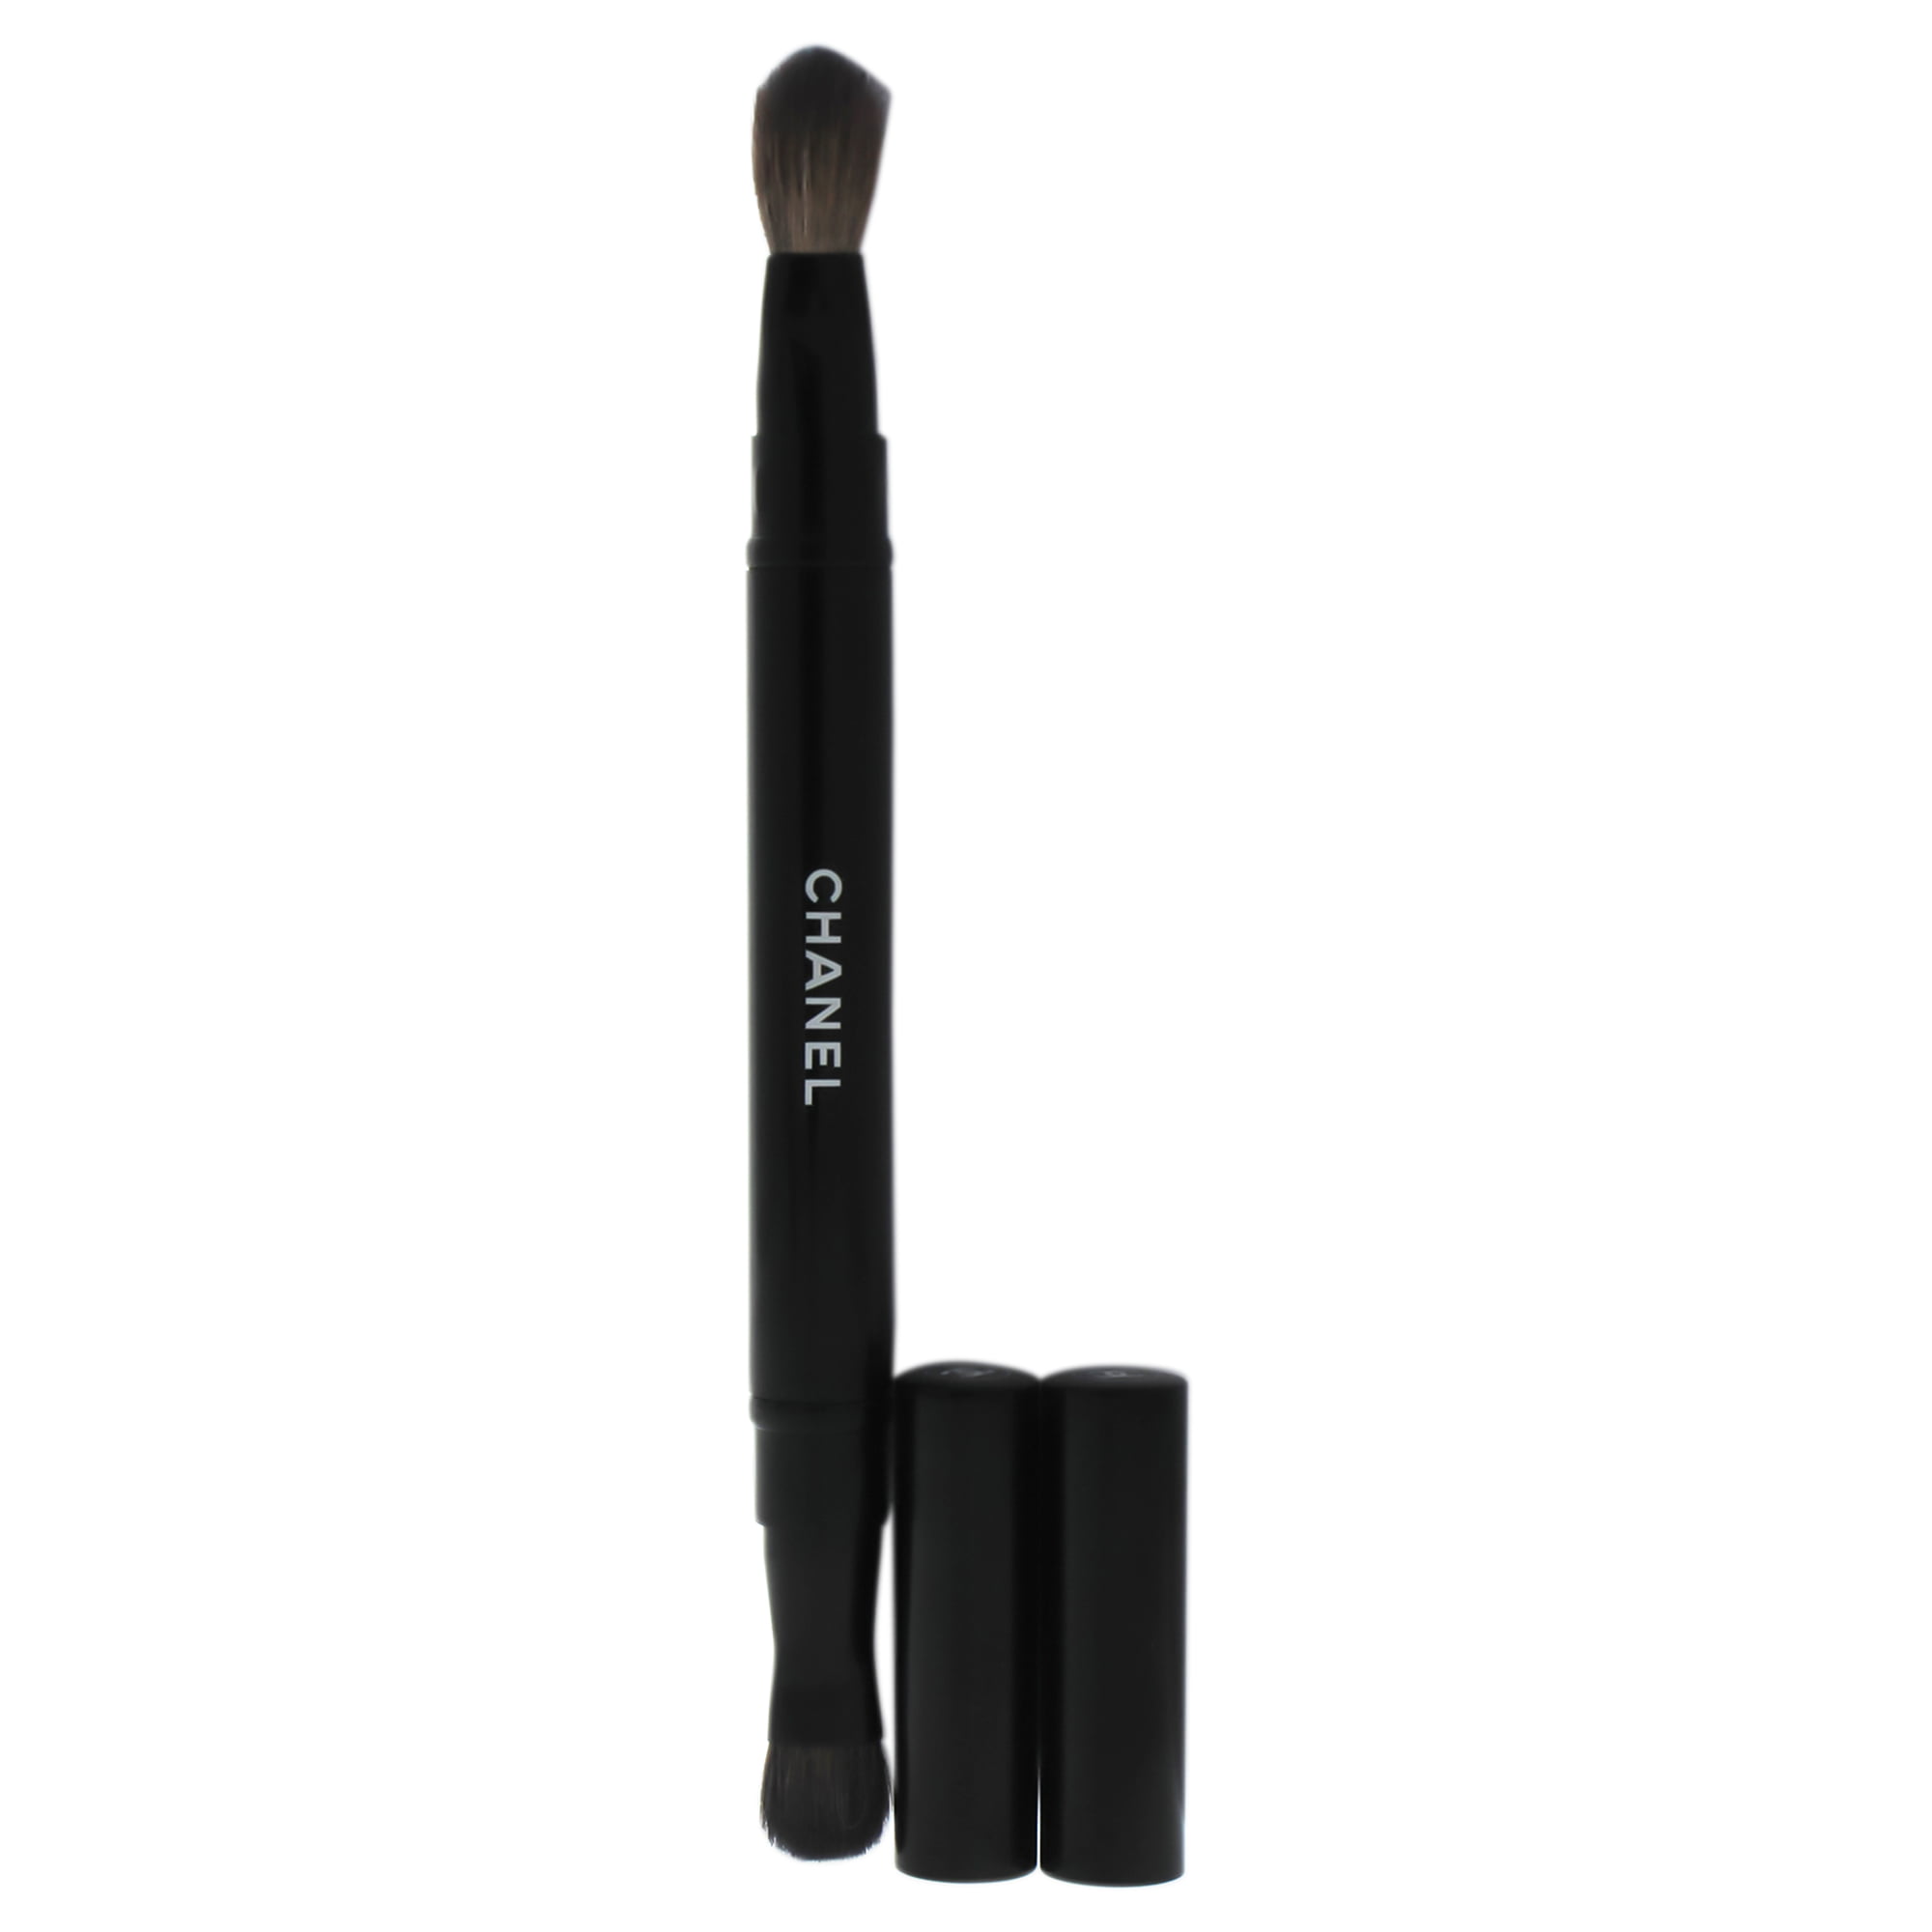 Retractable Dual-Tip Eyeshadow Brush by Chanel for Women - 1 Pc Brush